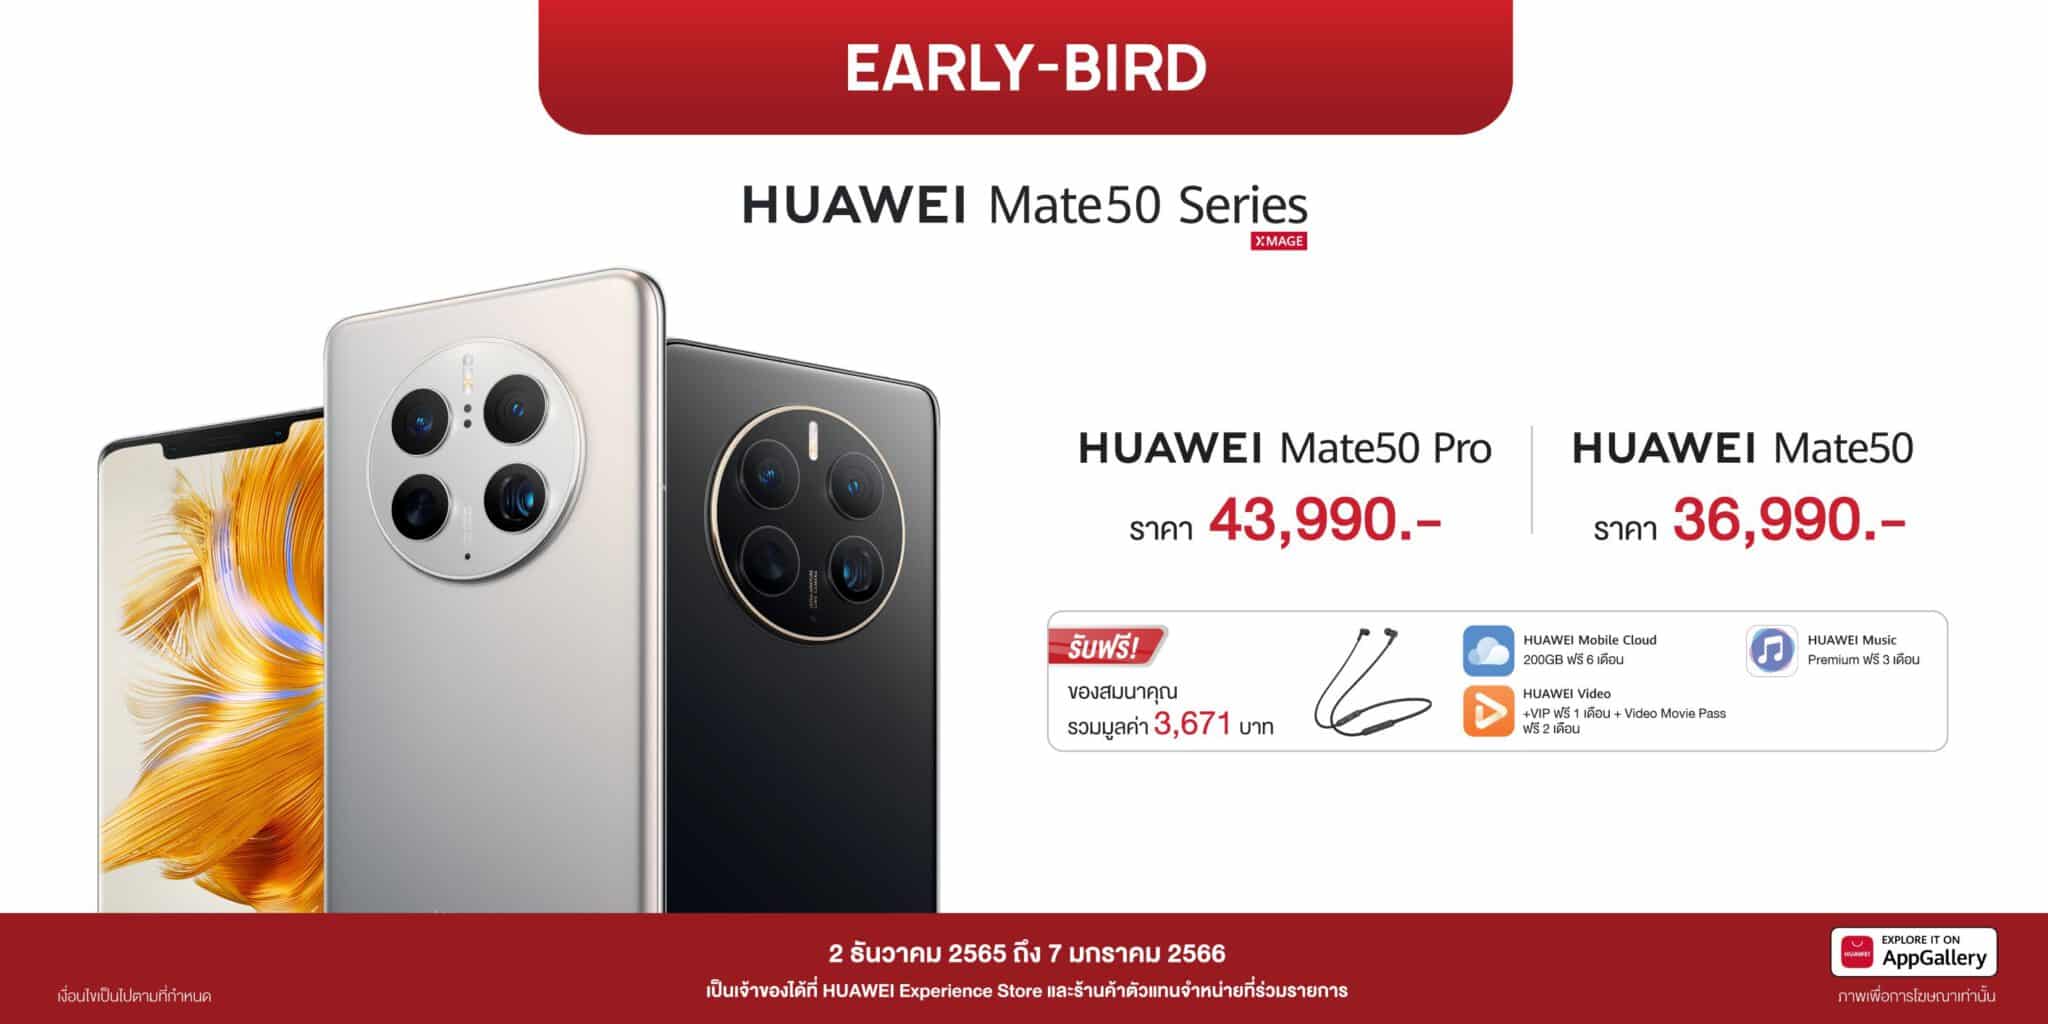 - HUAWEI Year End Campaign 2 scaled - ภาพที่ 3